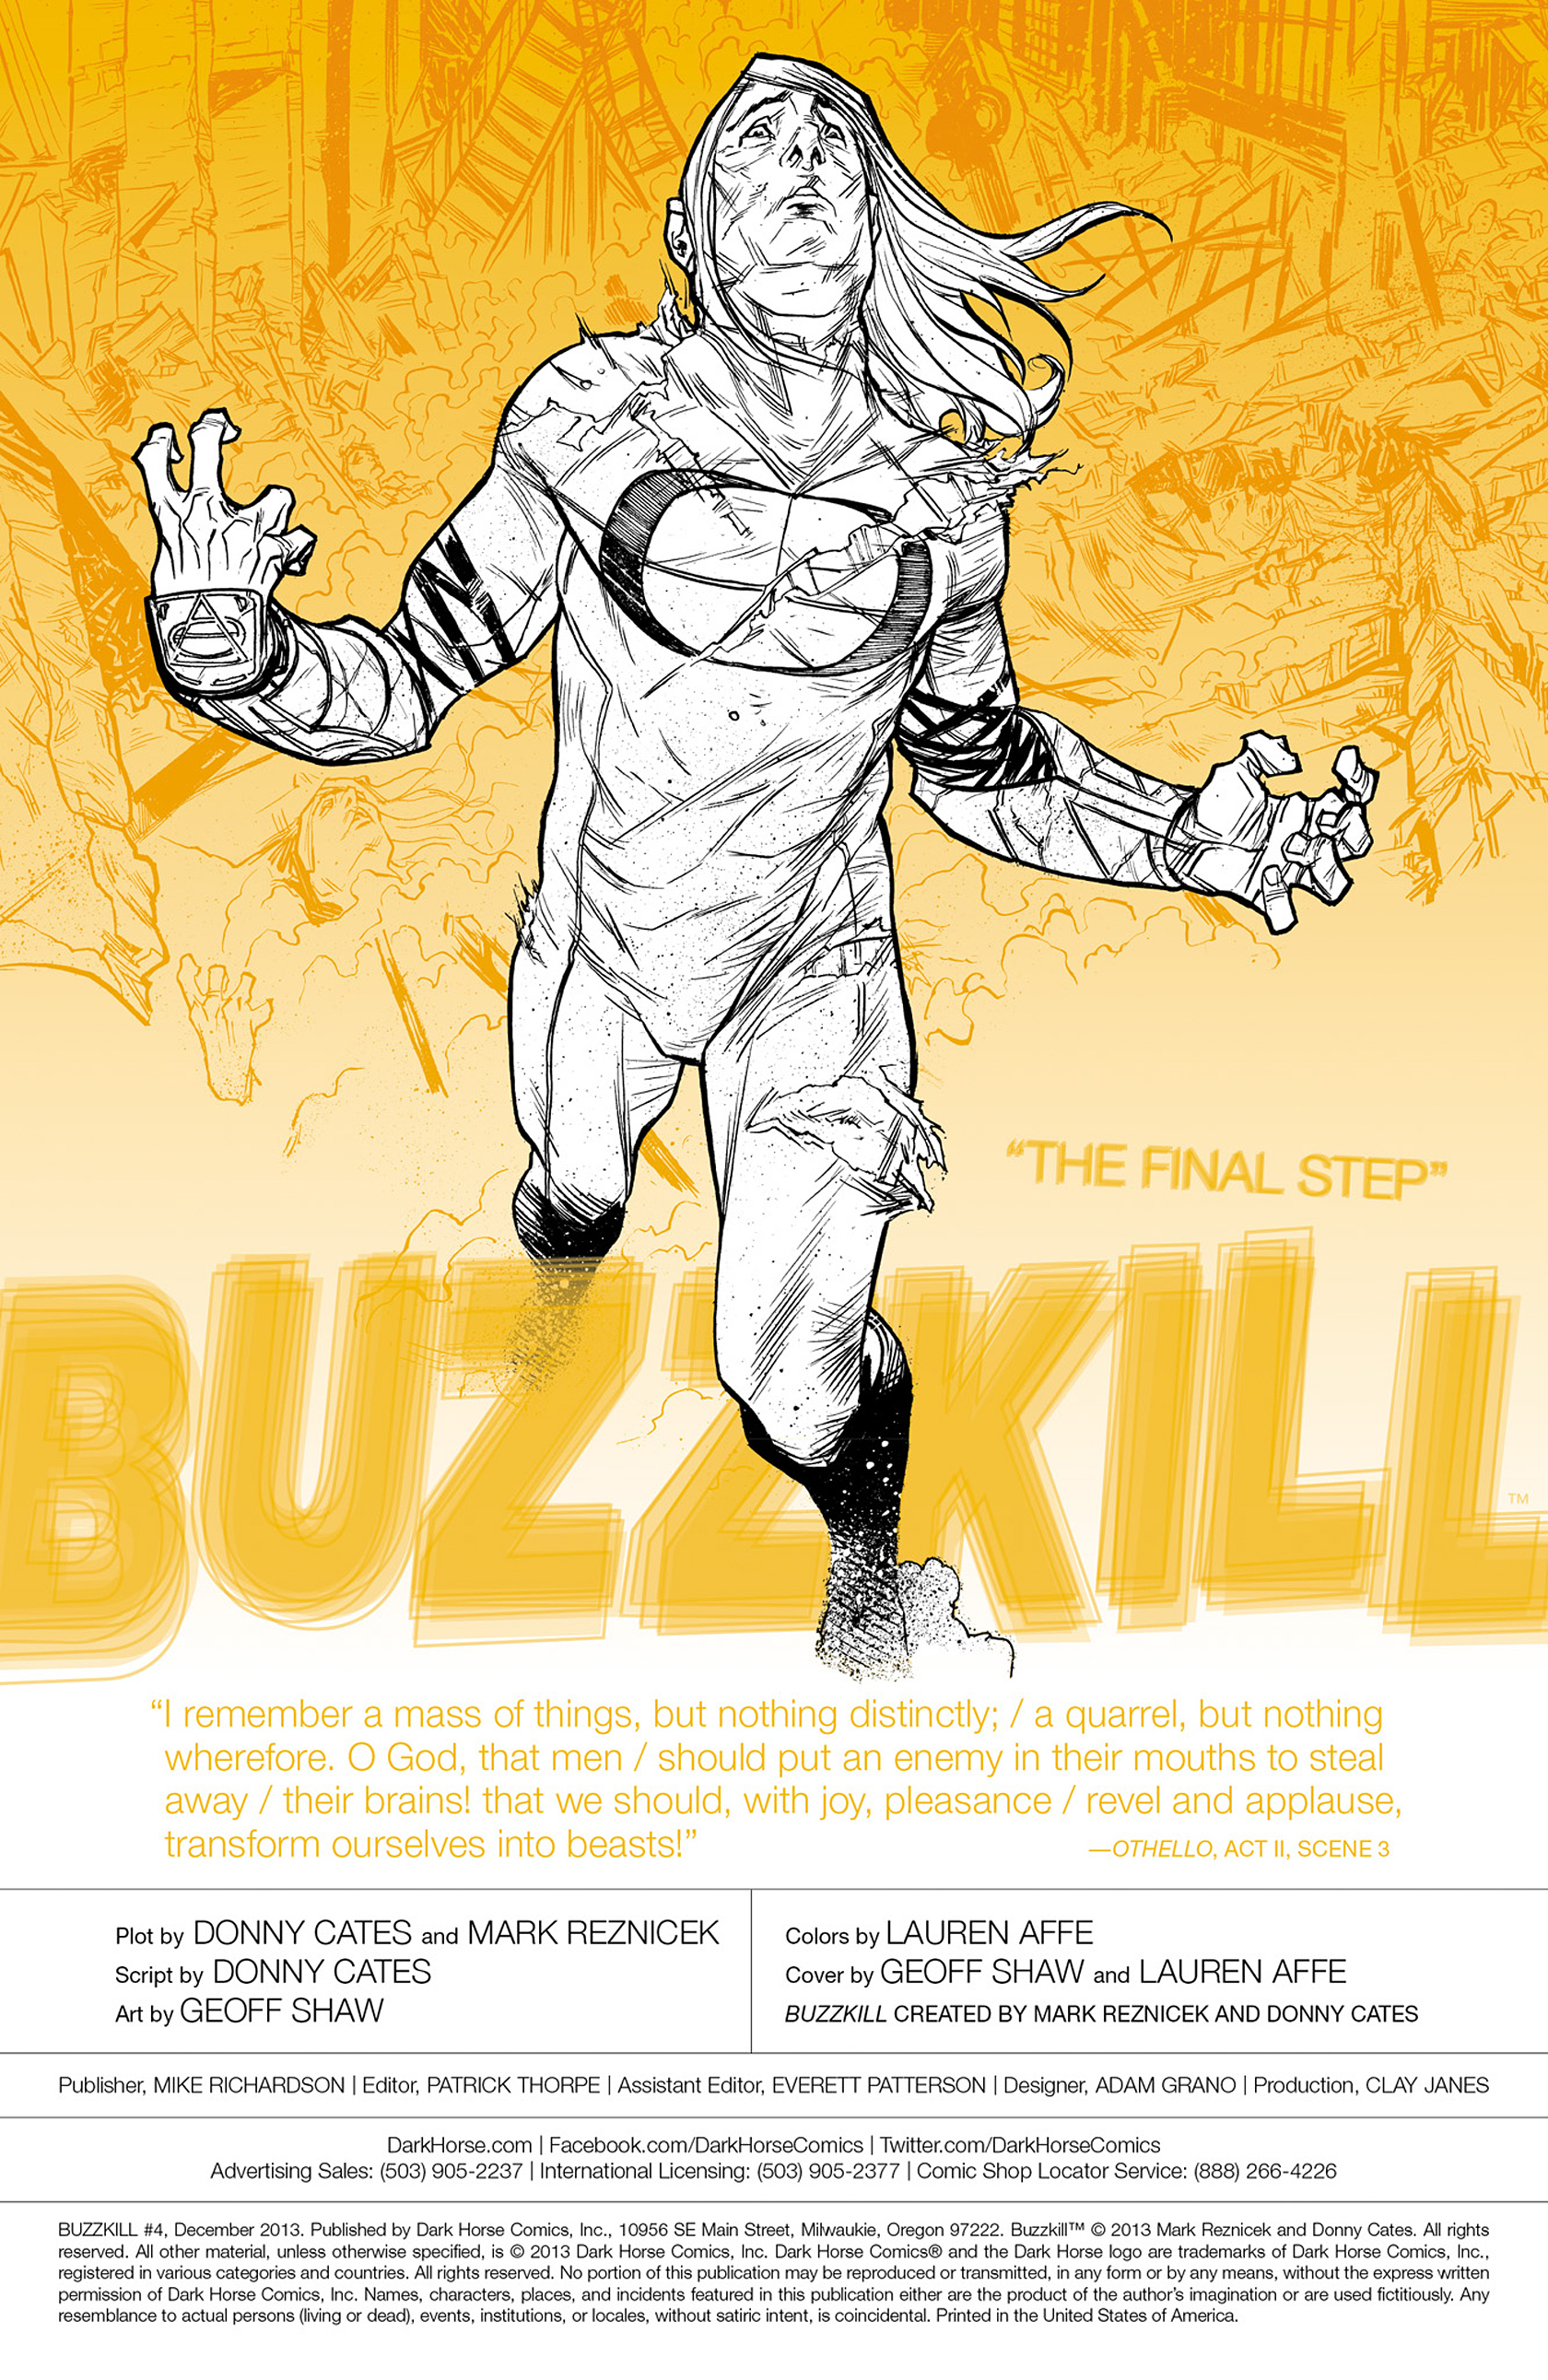 Read online Buzzkill comic -  Issue #4 - 2